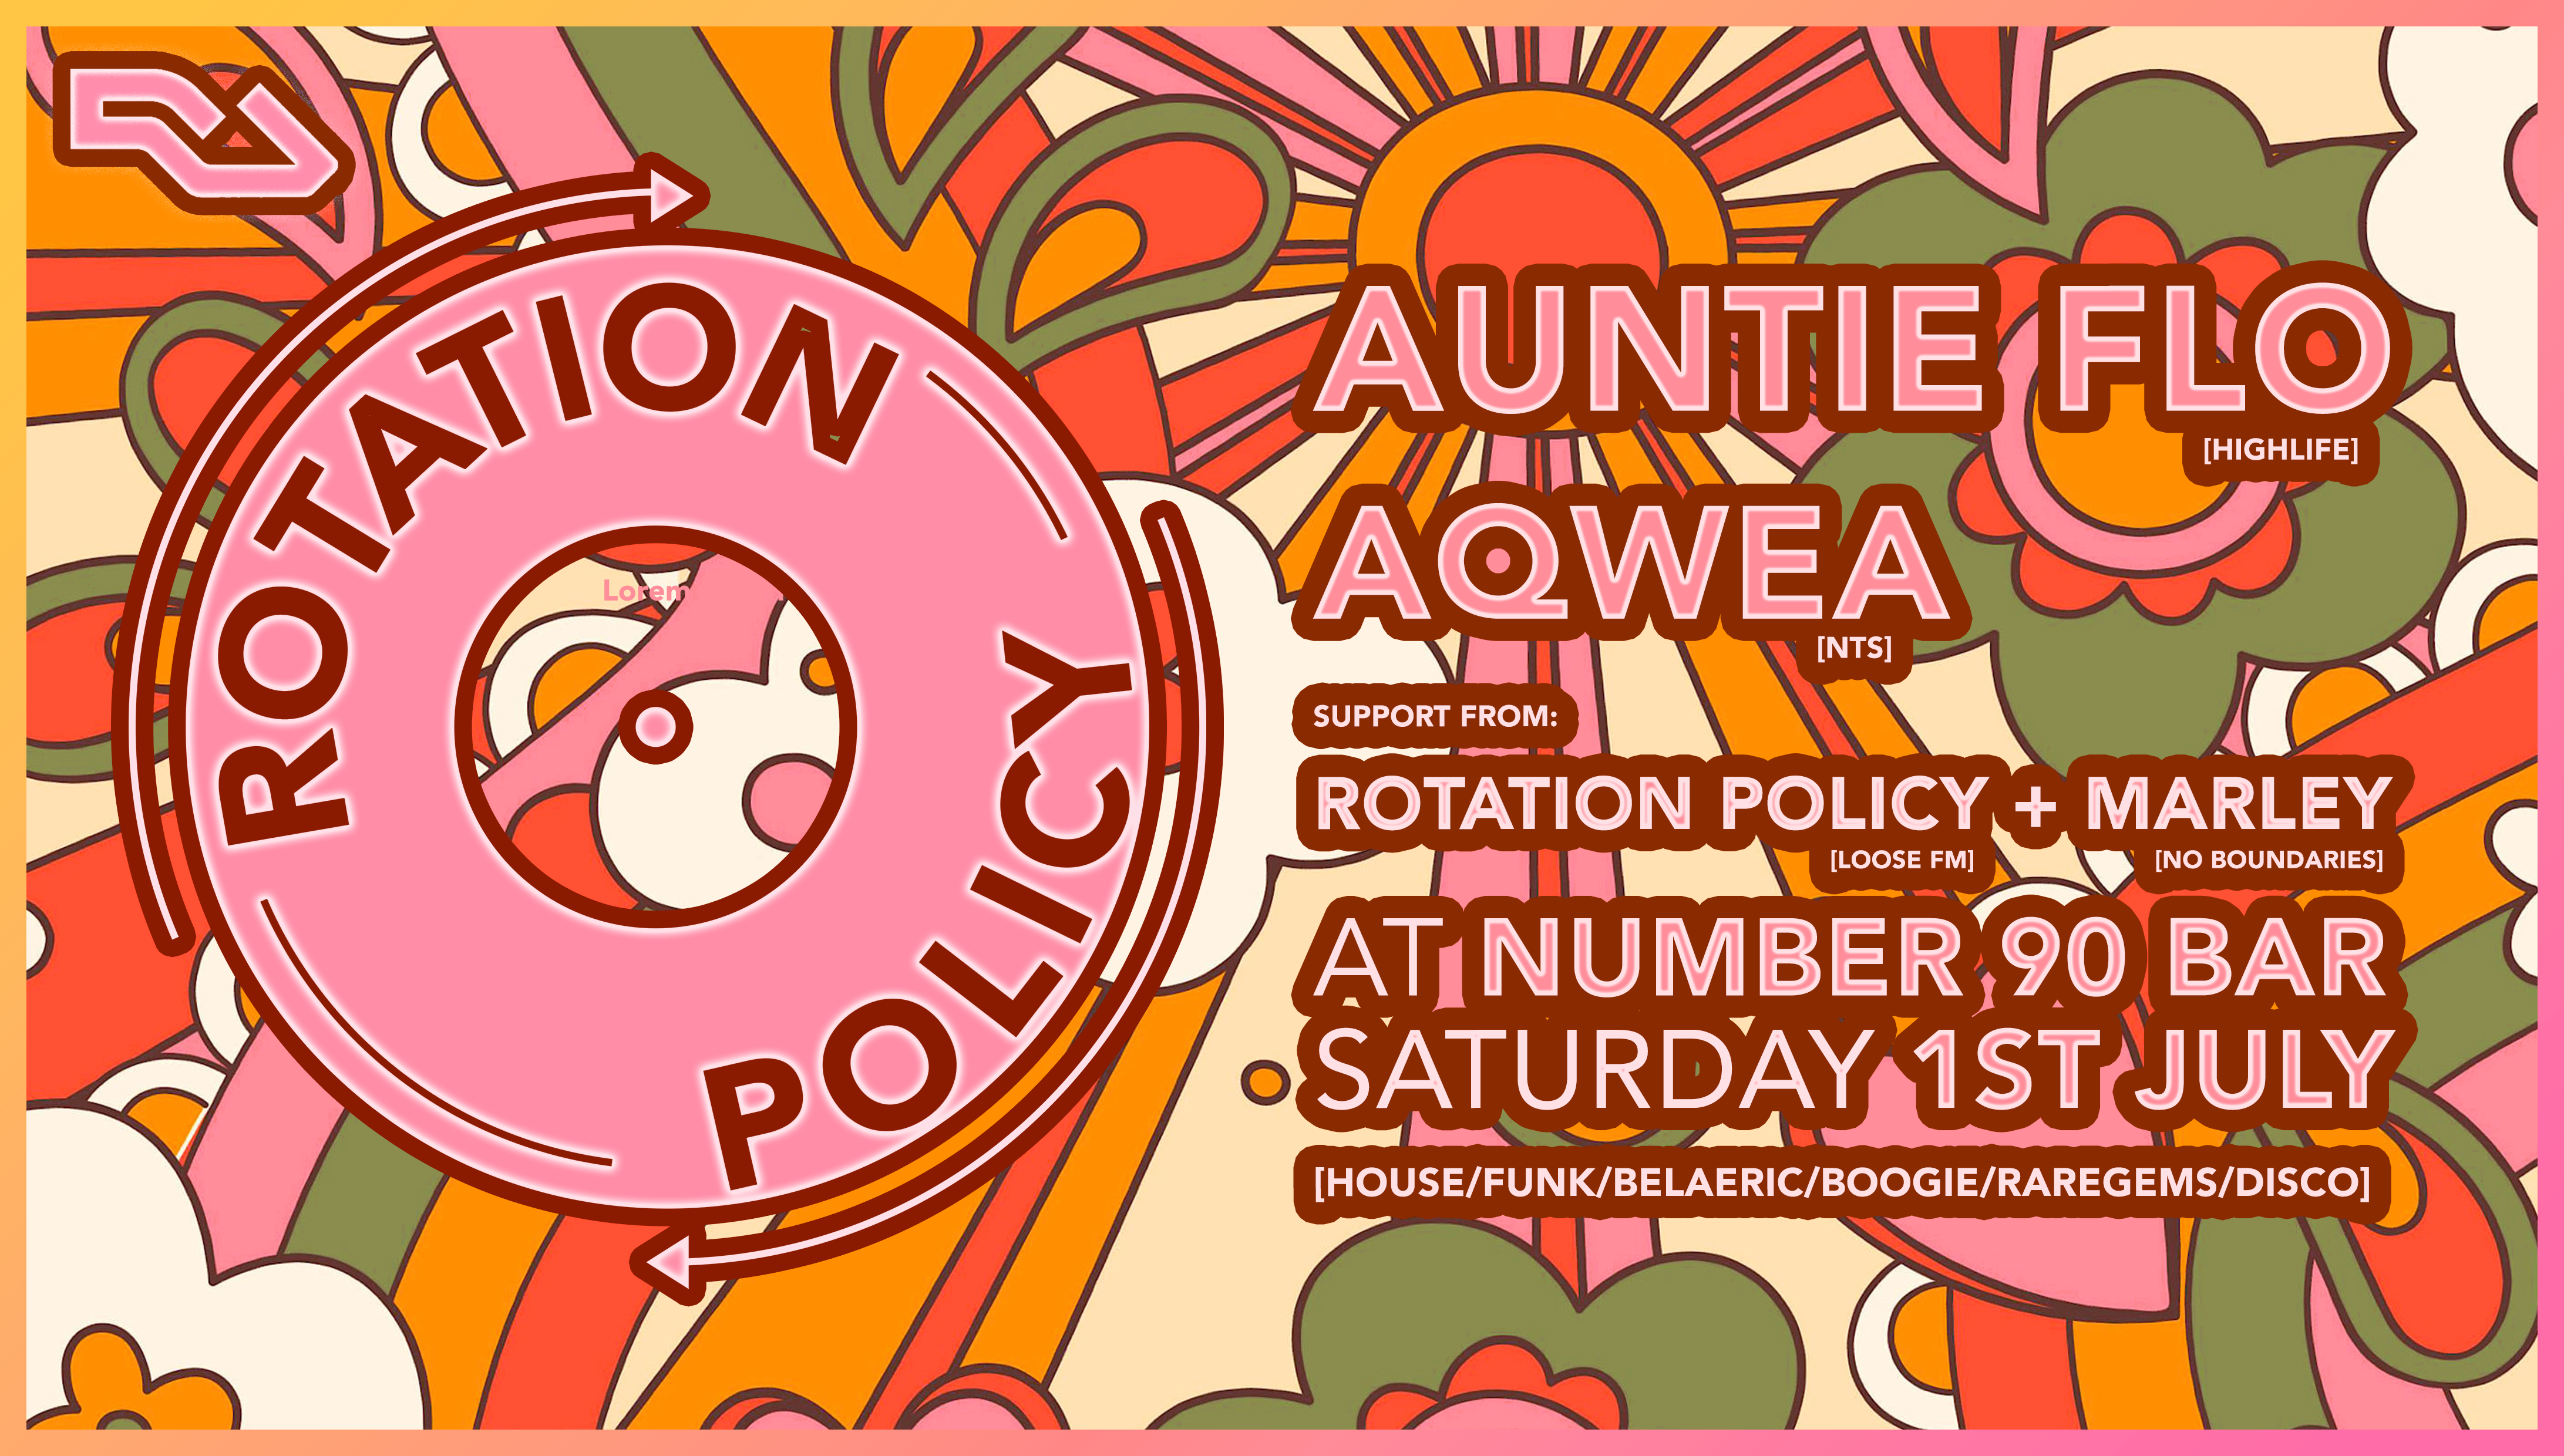 Rotation Policy: Auntie Flo [Highlife] + Aqwea [NTS] - フライヤー表